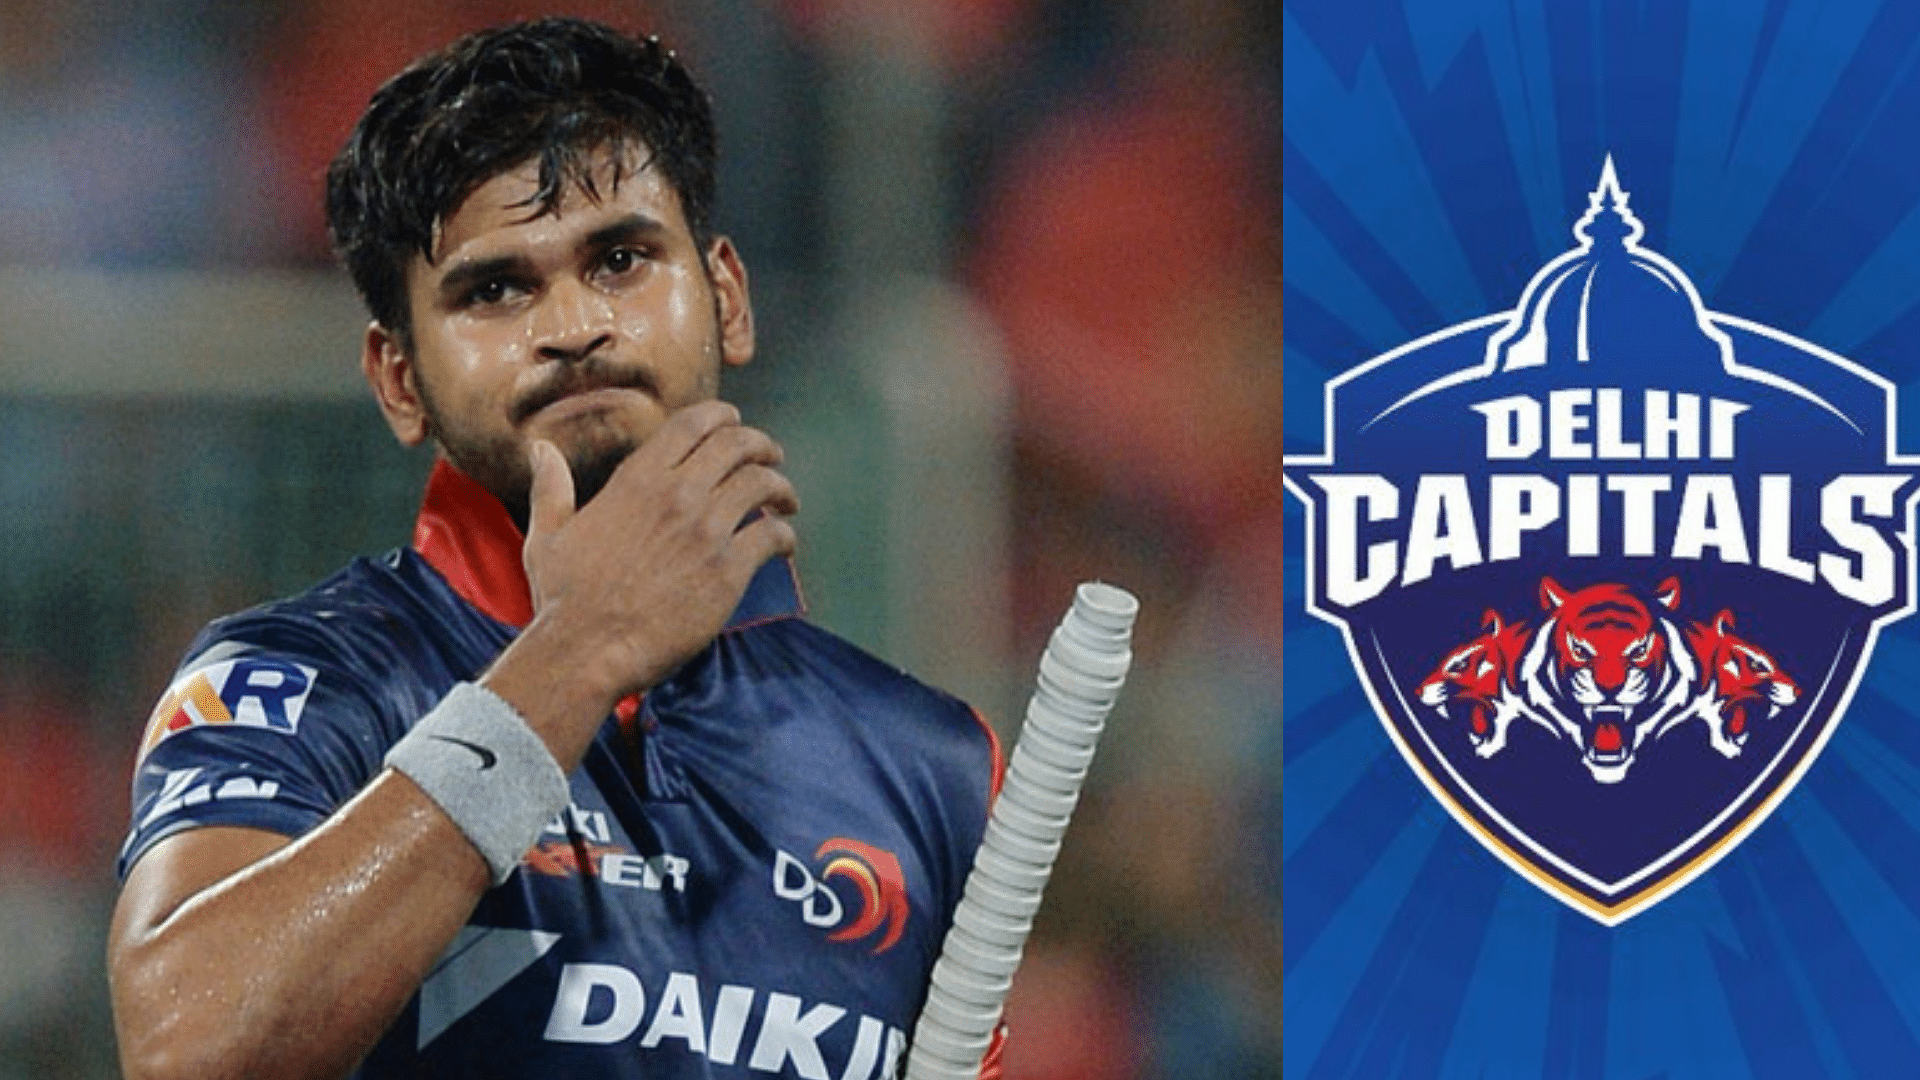 Shreyas Iyer will continue to lead the Delhi franchise, who go into the IPL 2019 auction with a changed name – Delhi Capitals.